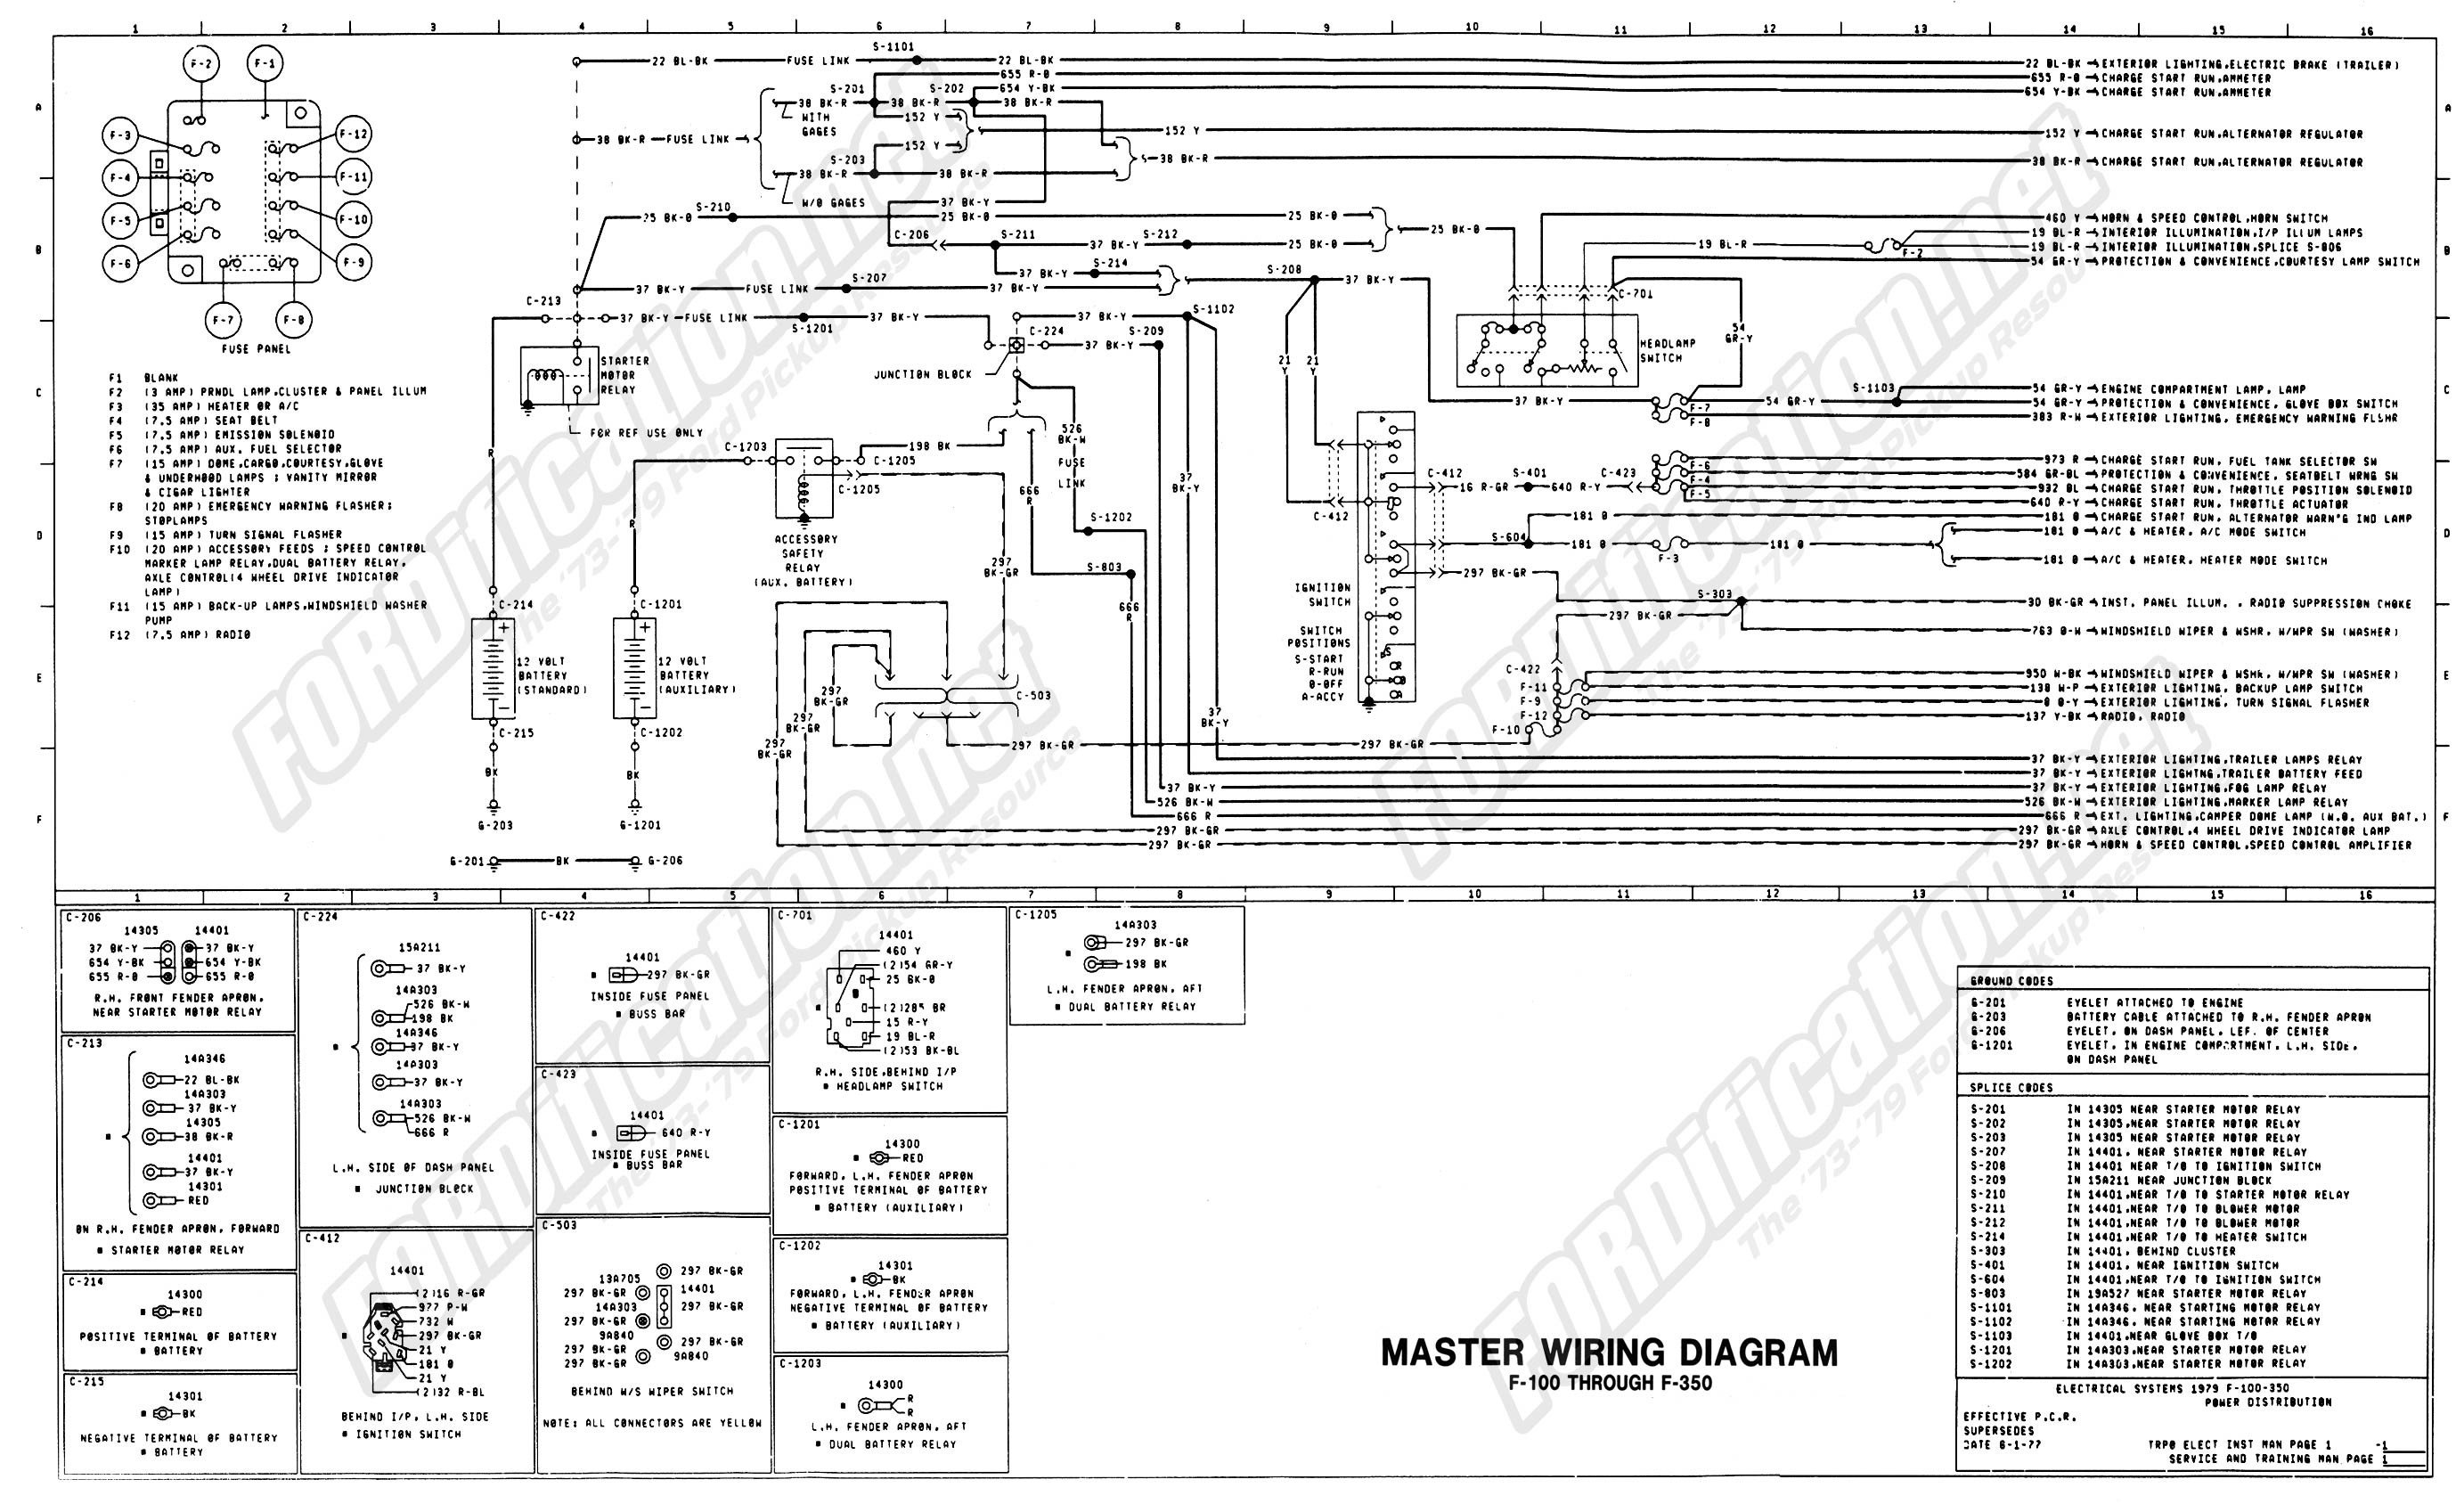 2006 ford Escape Engine Diagram 79 F150 solenoid Wiring Diagram ford Truck Enthusiasts forums Of 2006 ford Escape Engine Diagram